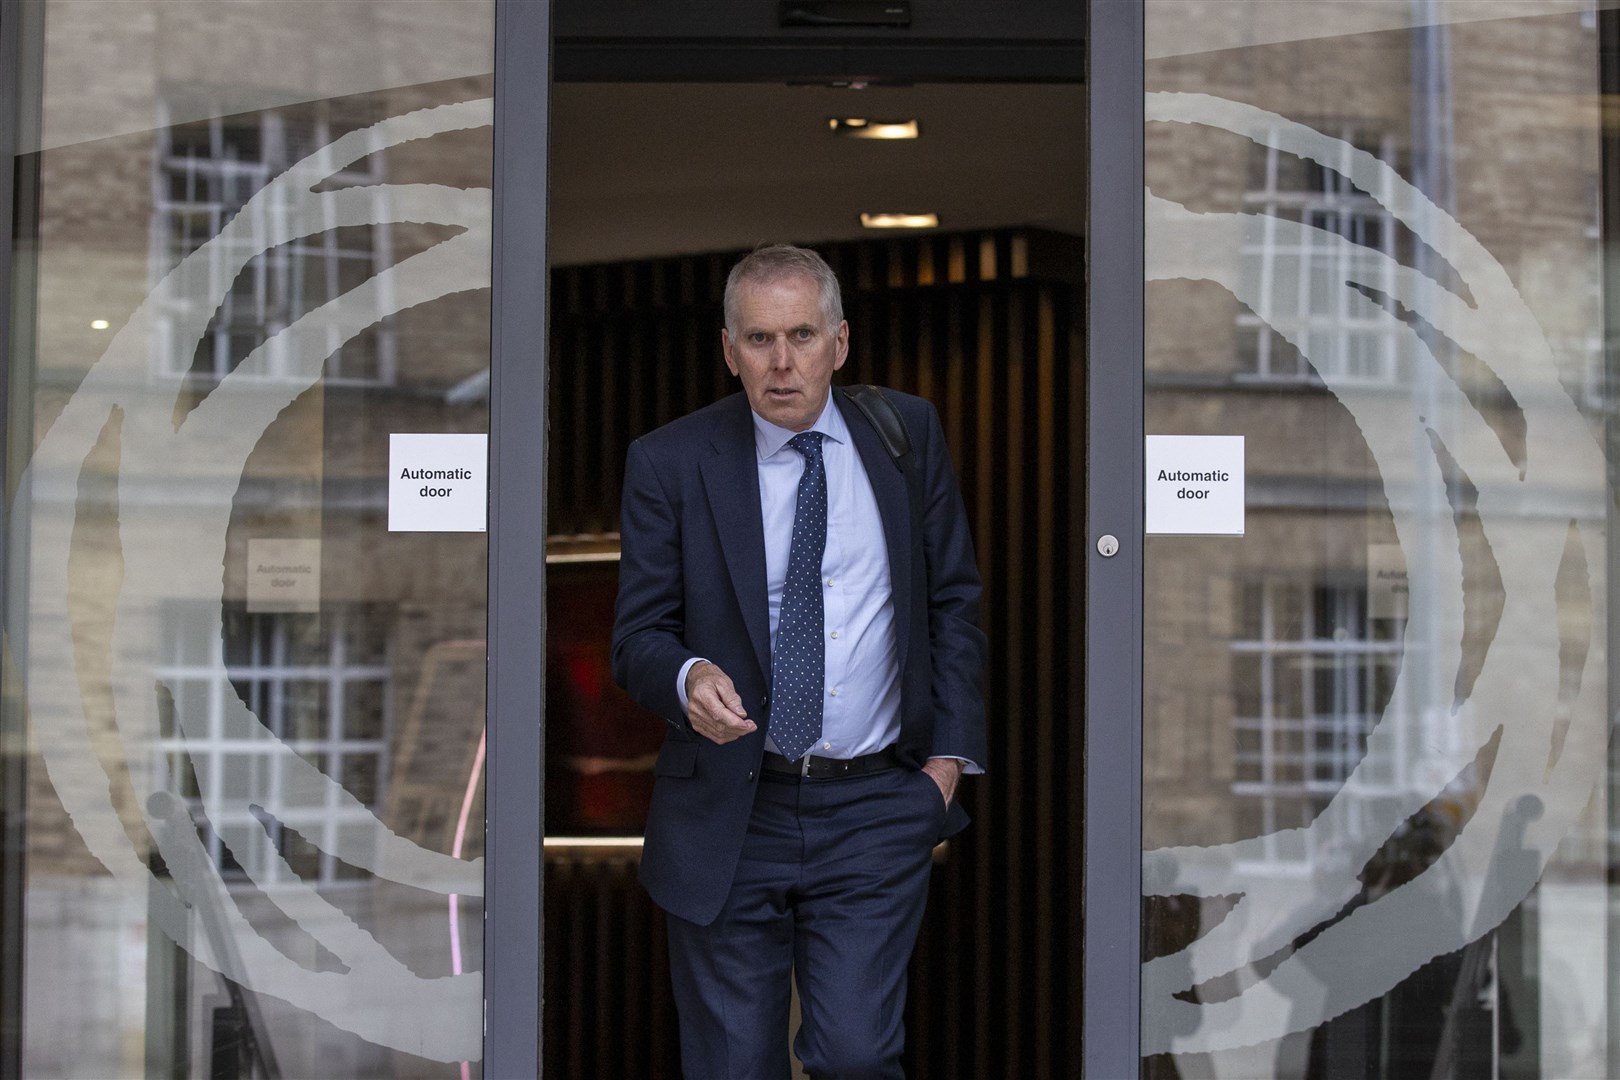 Sir David Sterling leaving the Clayton Hotel in Belfast after giving evidence at the UK Covid-19 inquiry hearing on Wednesday (PA)